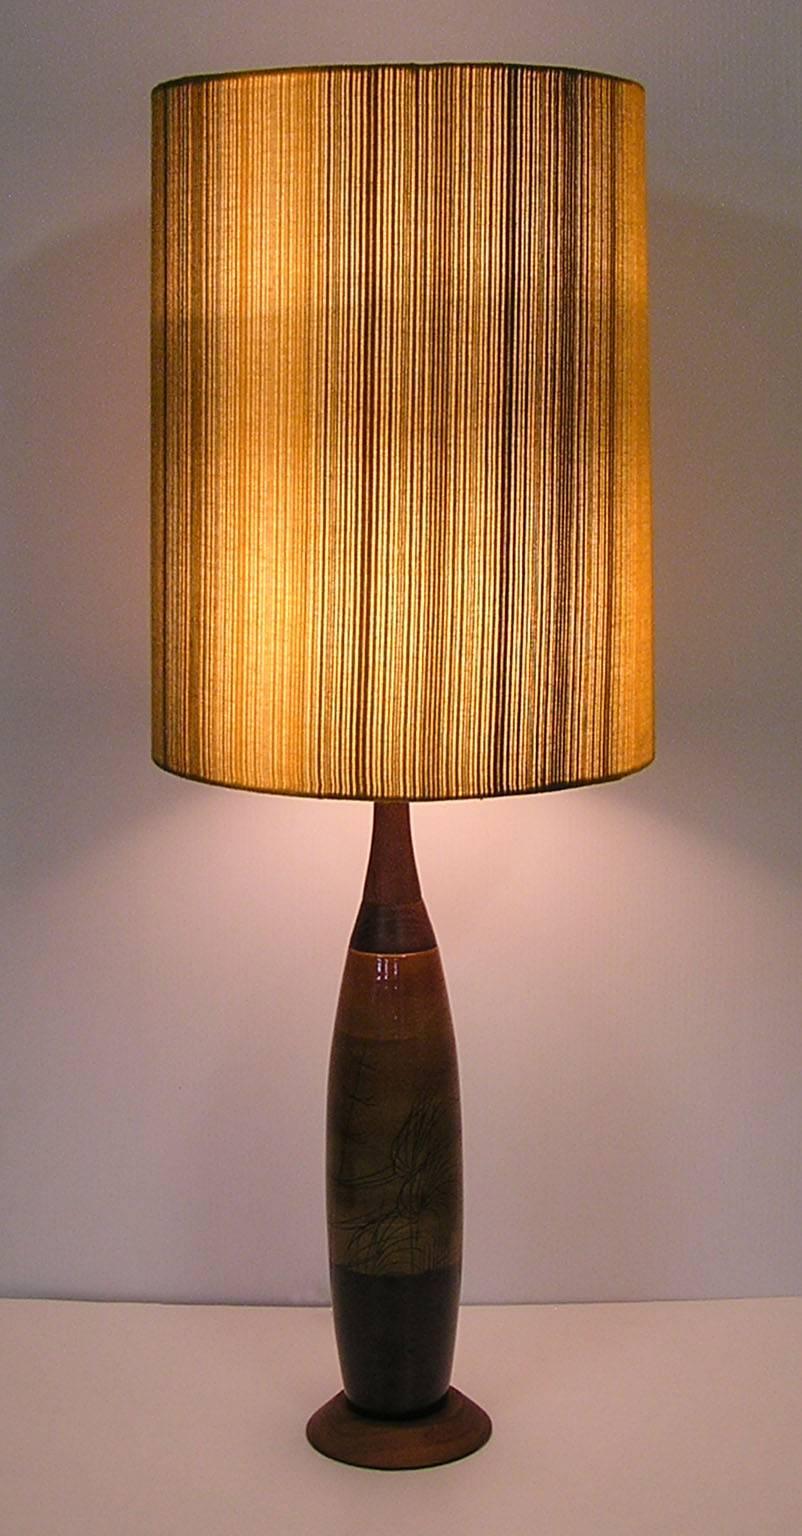 A gorgeous ceramic pottery table lamp from the 1960s Mid-Century Modern era with original multi-toned fabric shade.  Designed with a tapered slender form and featuring a neutral toned ceramic body that is decorated with hand-painted detailing. 